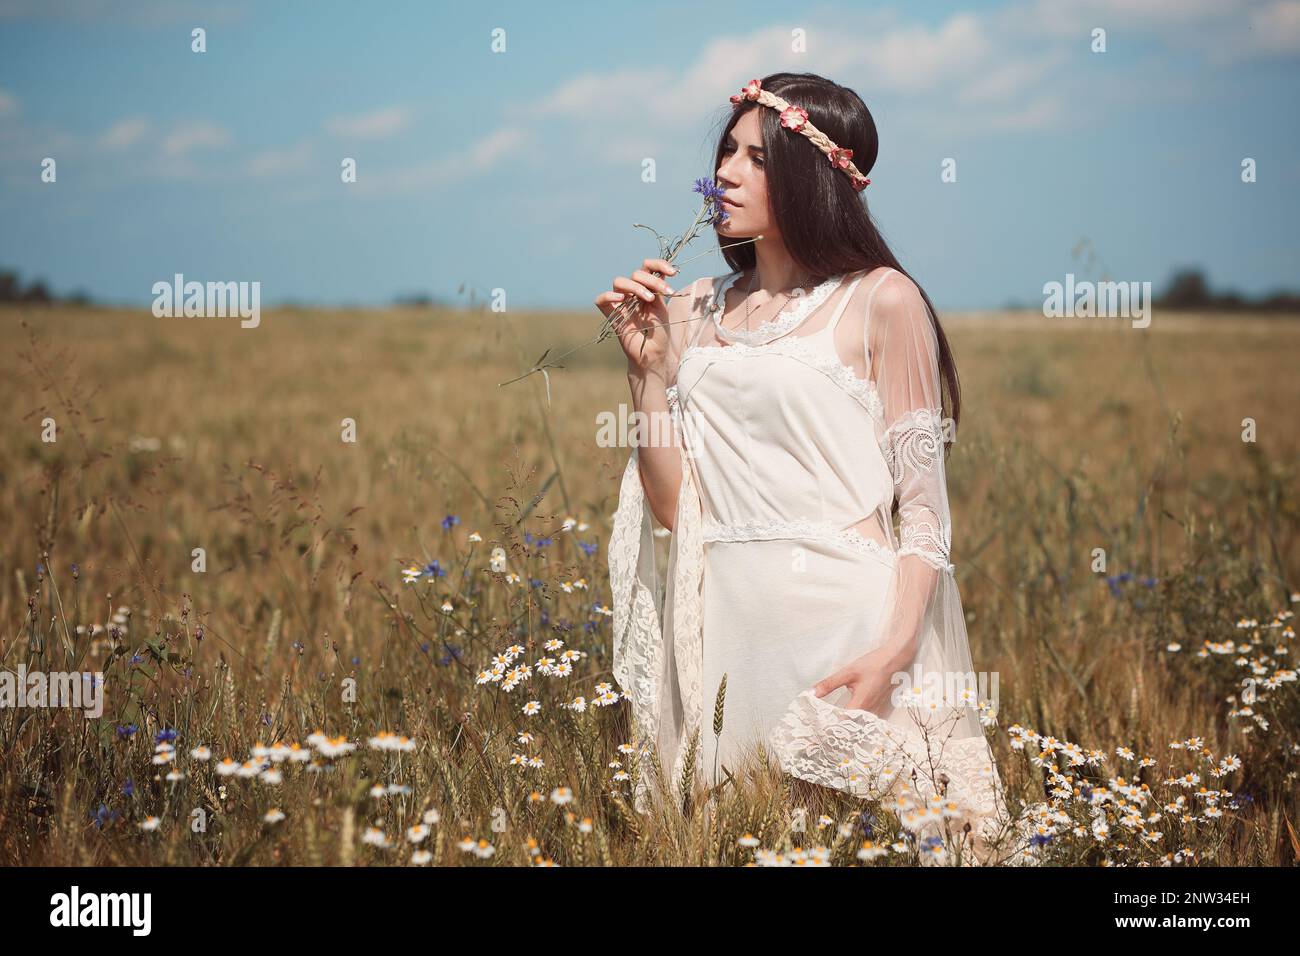 Innocent young woman in summer field Stock Photo